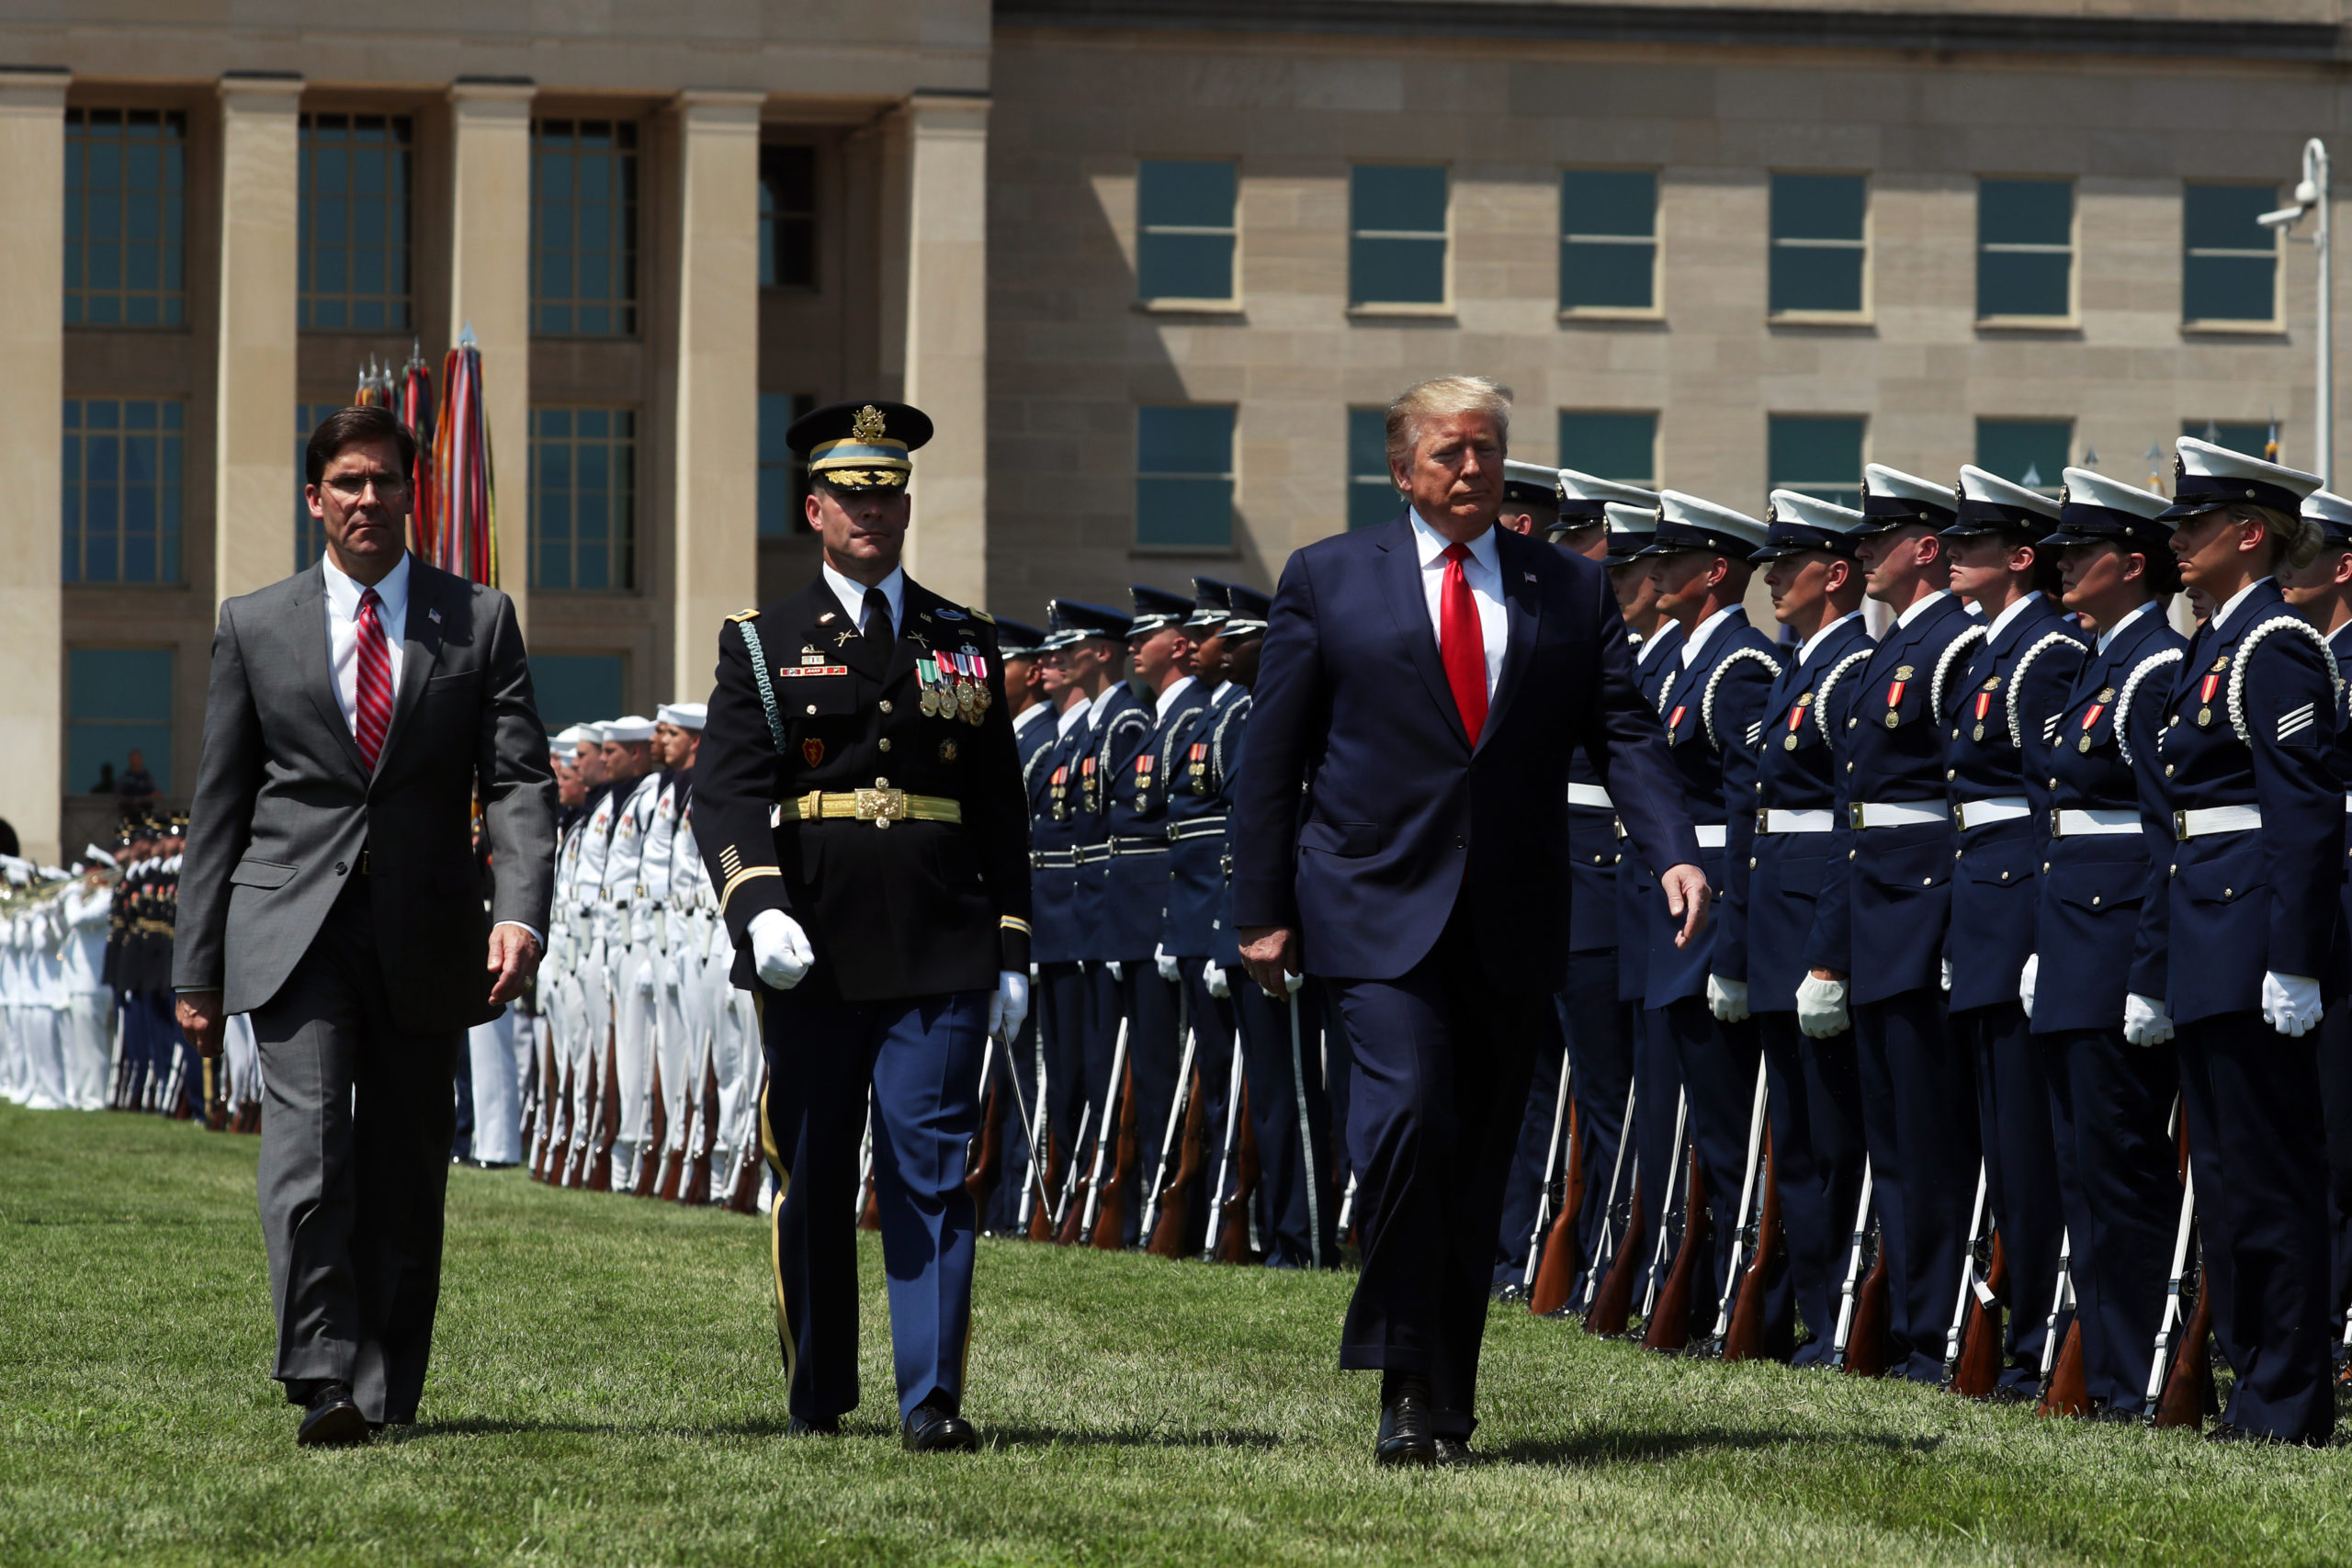 ARLINGTON, VA - JULY 25: U.S. President Donald Trump (R) and Secretary of Defense Dr. Mark Esper (L) inspect the troops during a full honors welcome ceremony on the parade grounds at the Pentagon, on July 25, 2019 in Arlington, Virginia. Earlier this week Esper was sworn in as the 27th Secretary of Defense. (Photo by Mark Wilson/Getty Images)